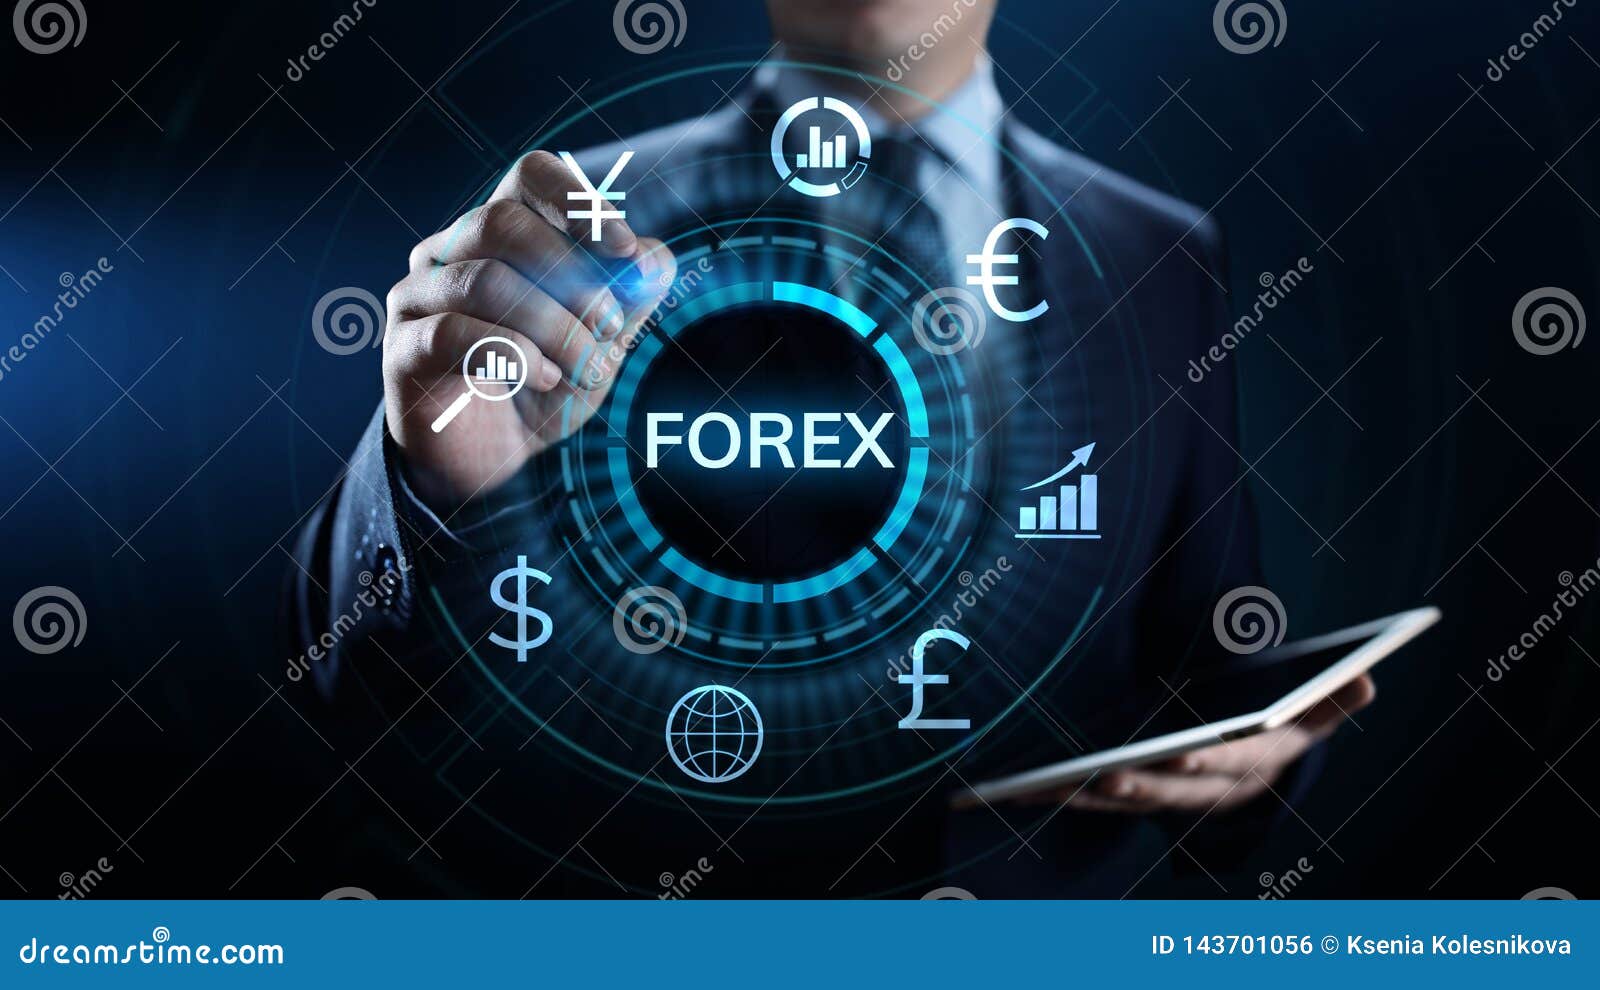 Fxtrade Investment Home Page